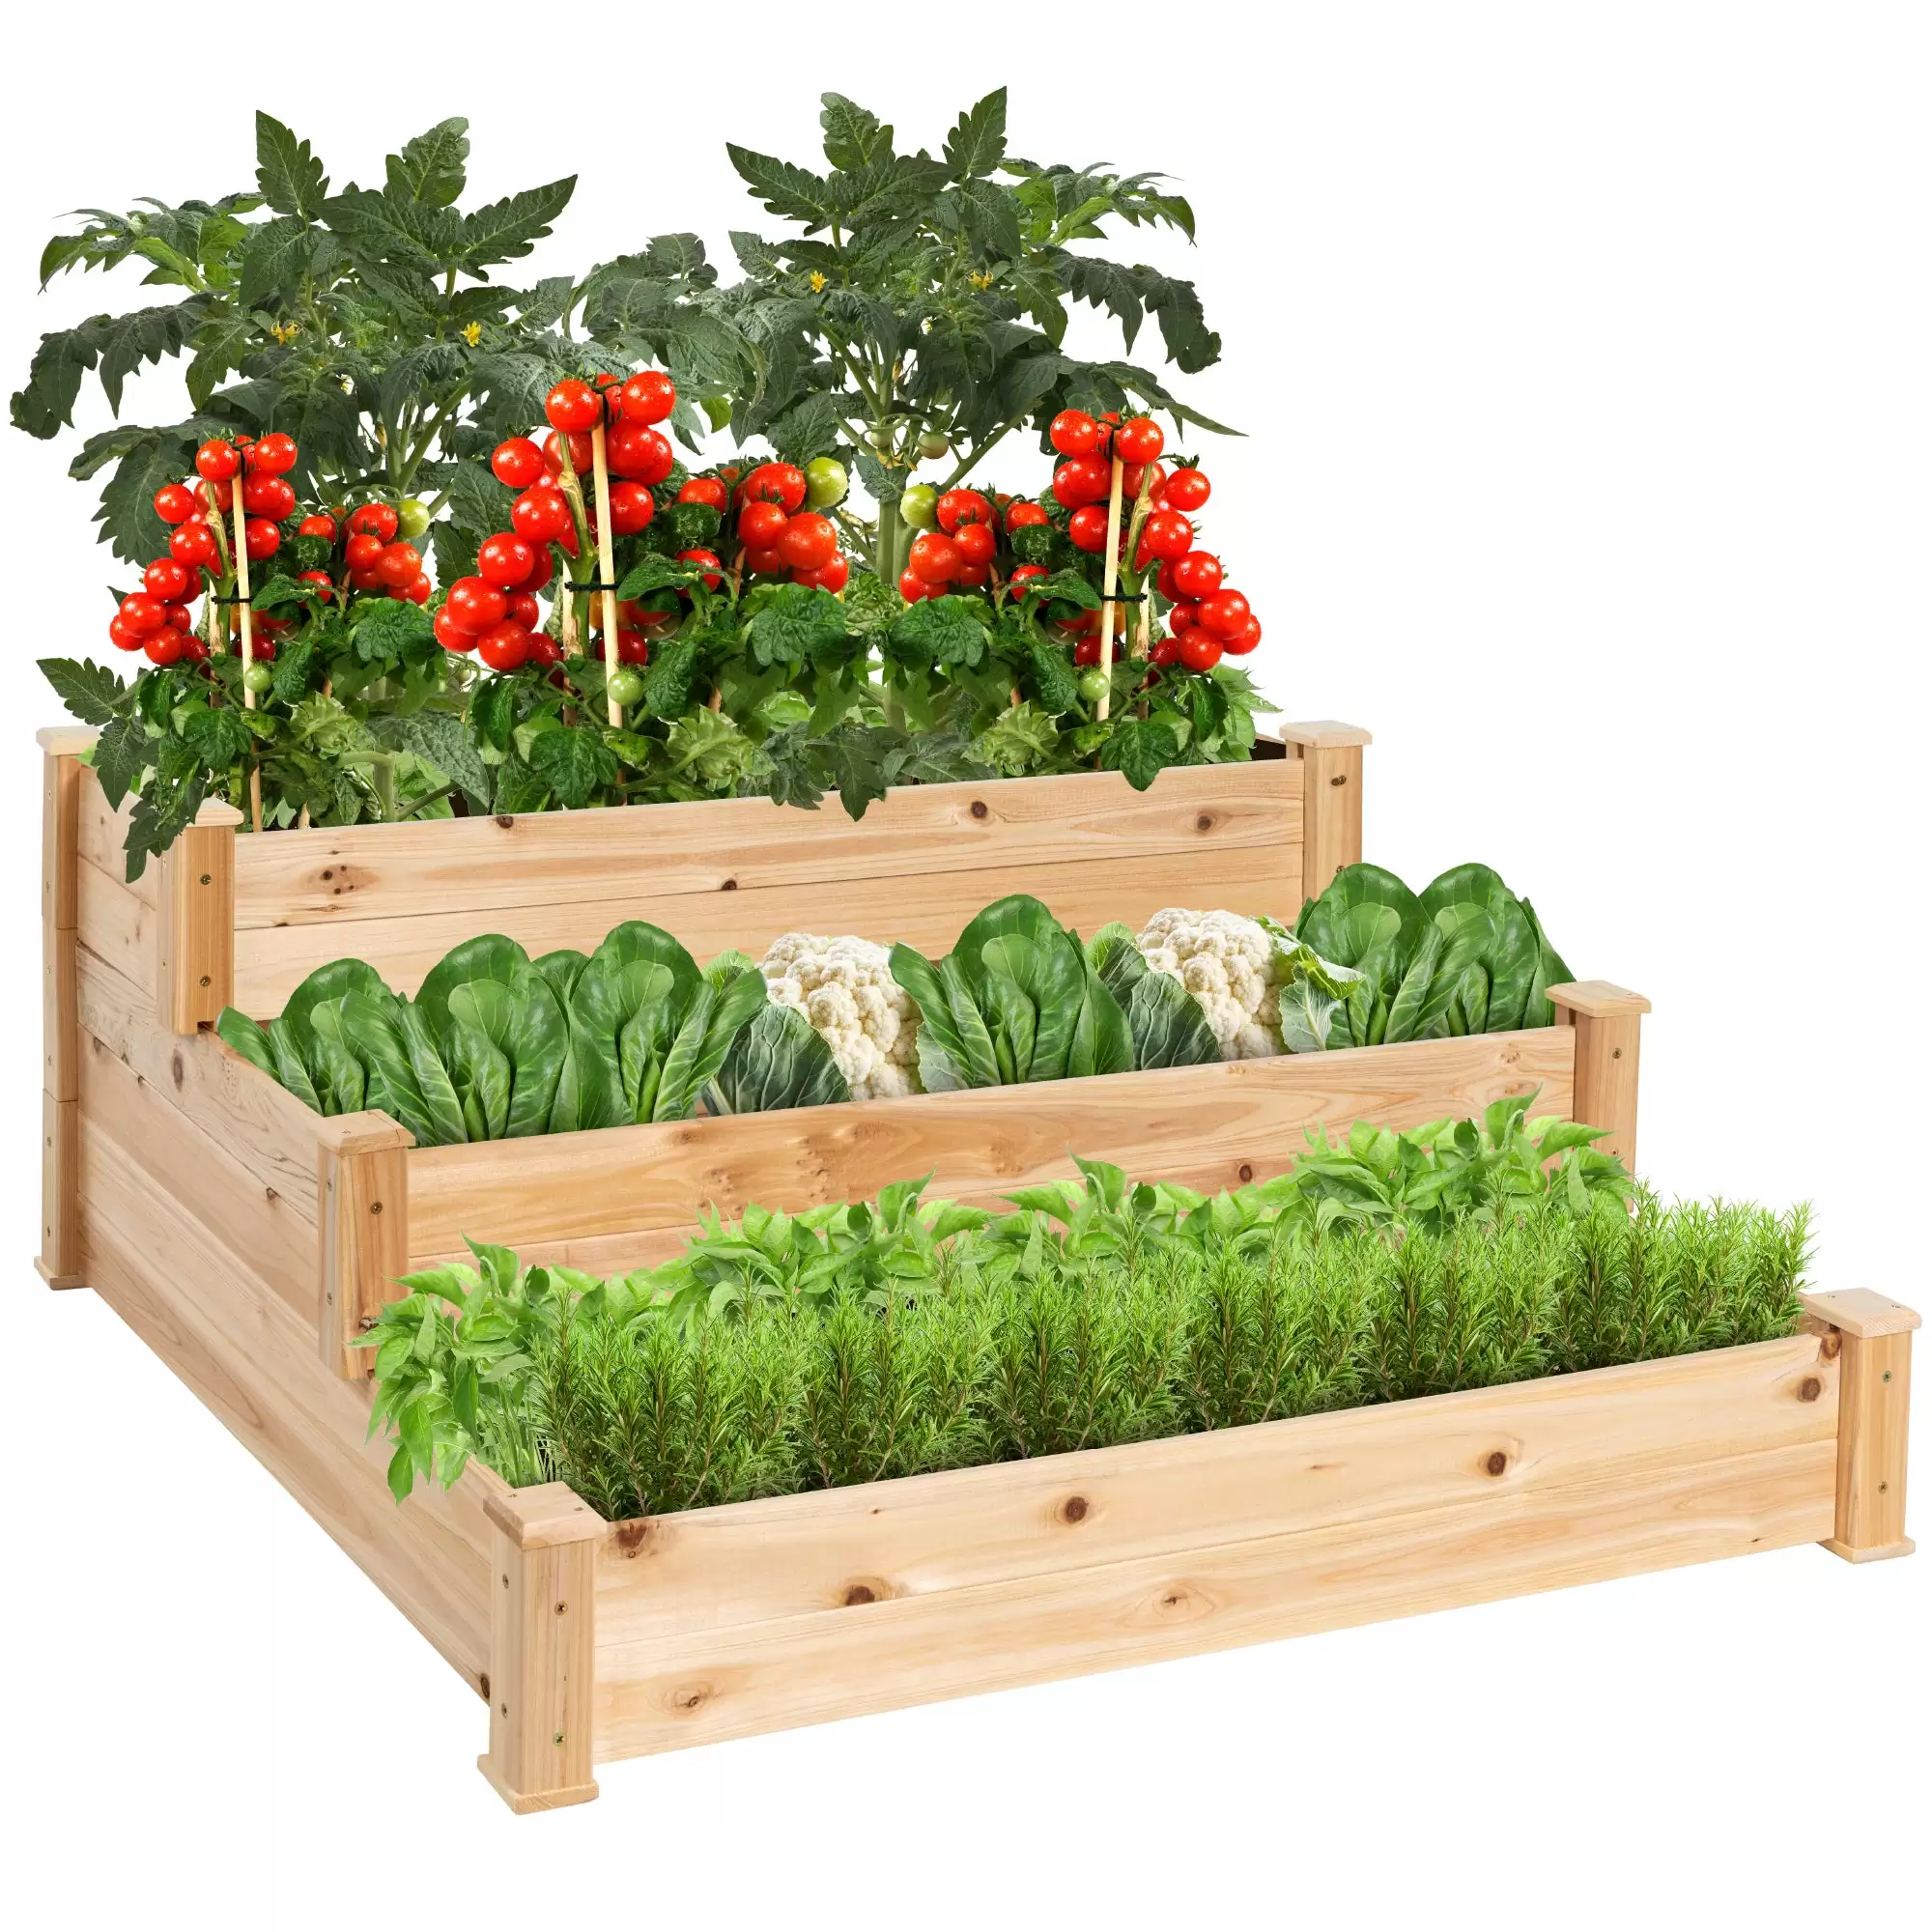 Starting At $59.99 3-Tier Raised Fir Wood Garden Bed Planter W/ Stackable & Flat Setup At Bestchoiceproducts